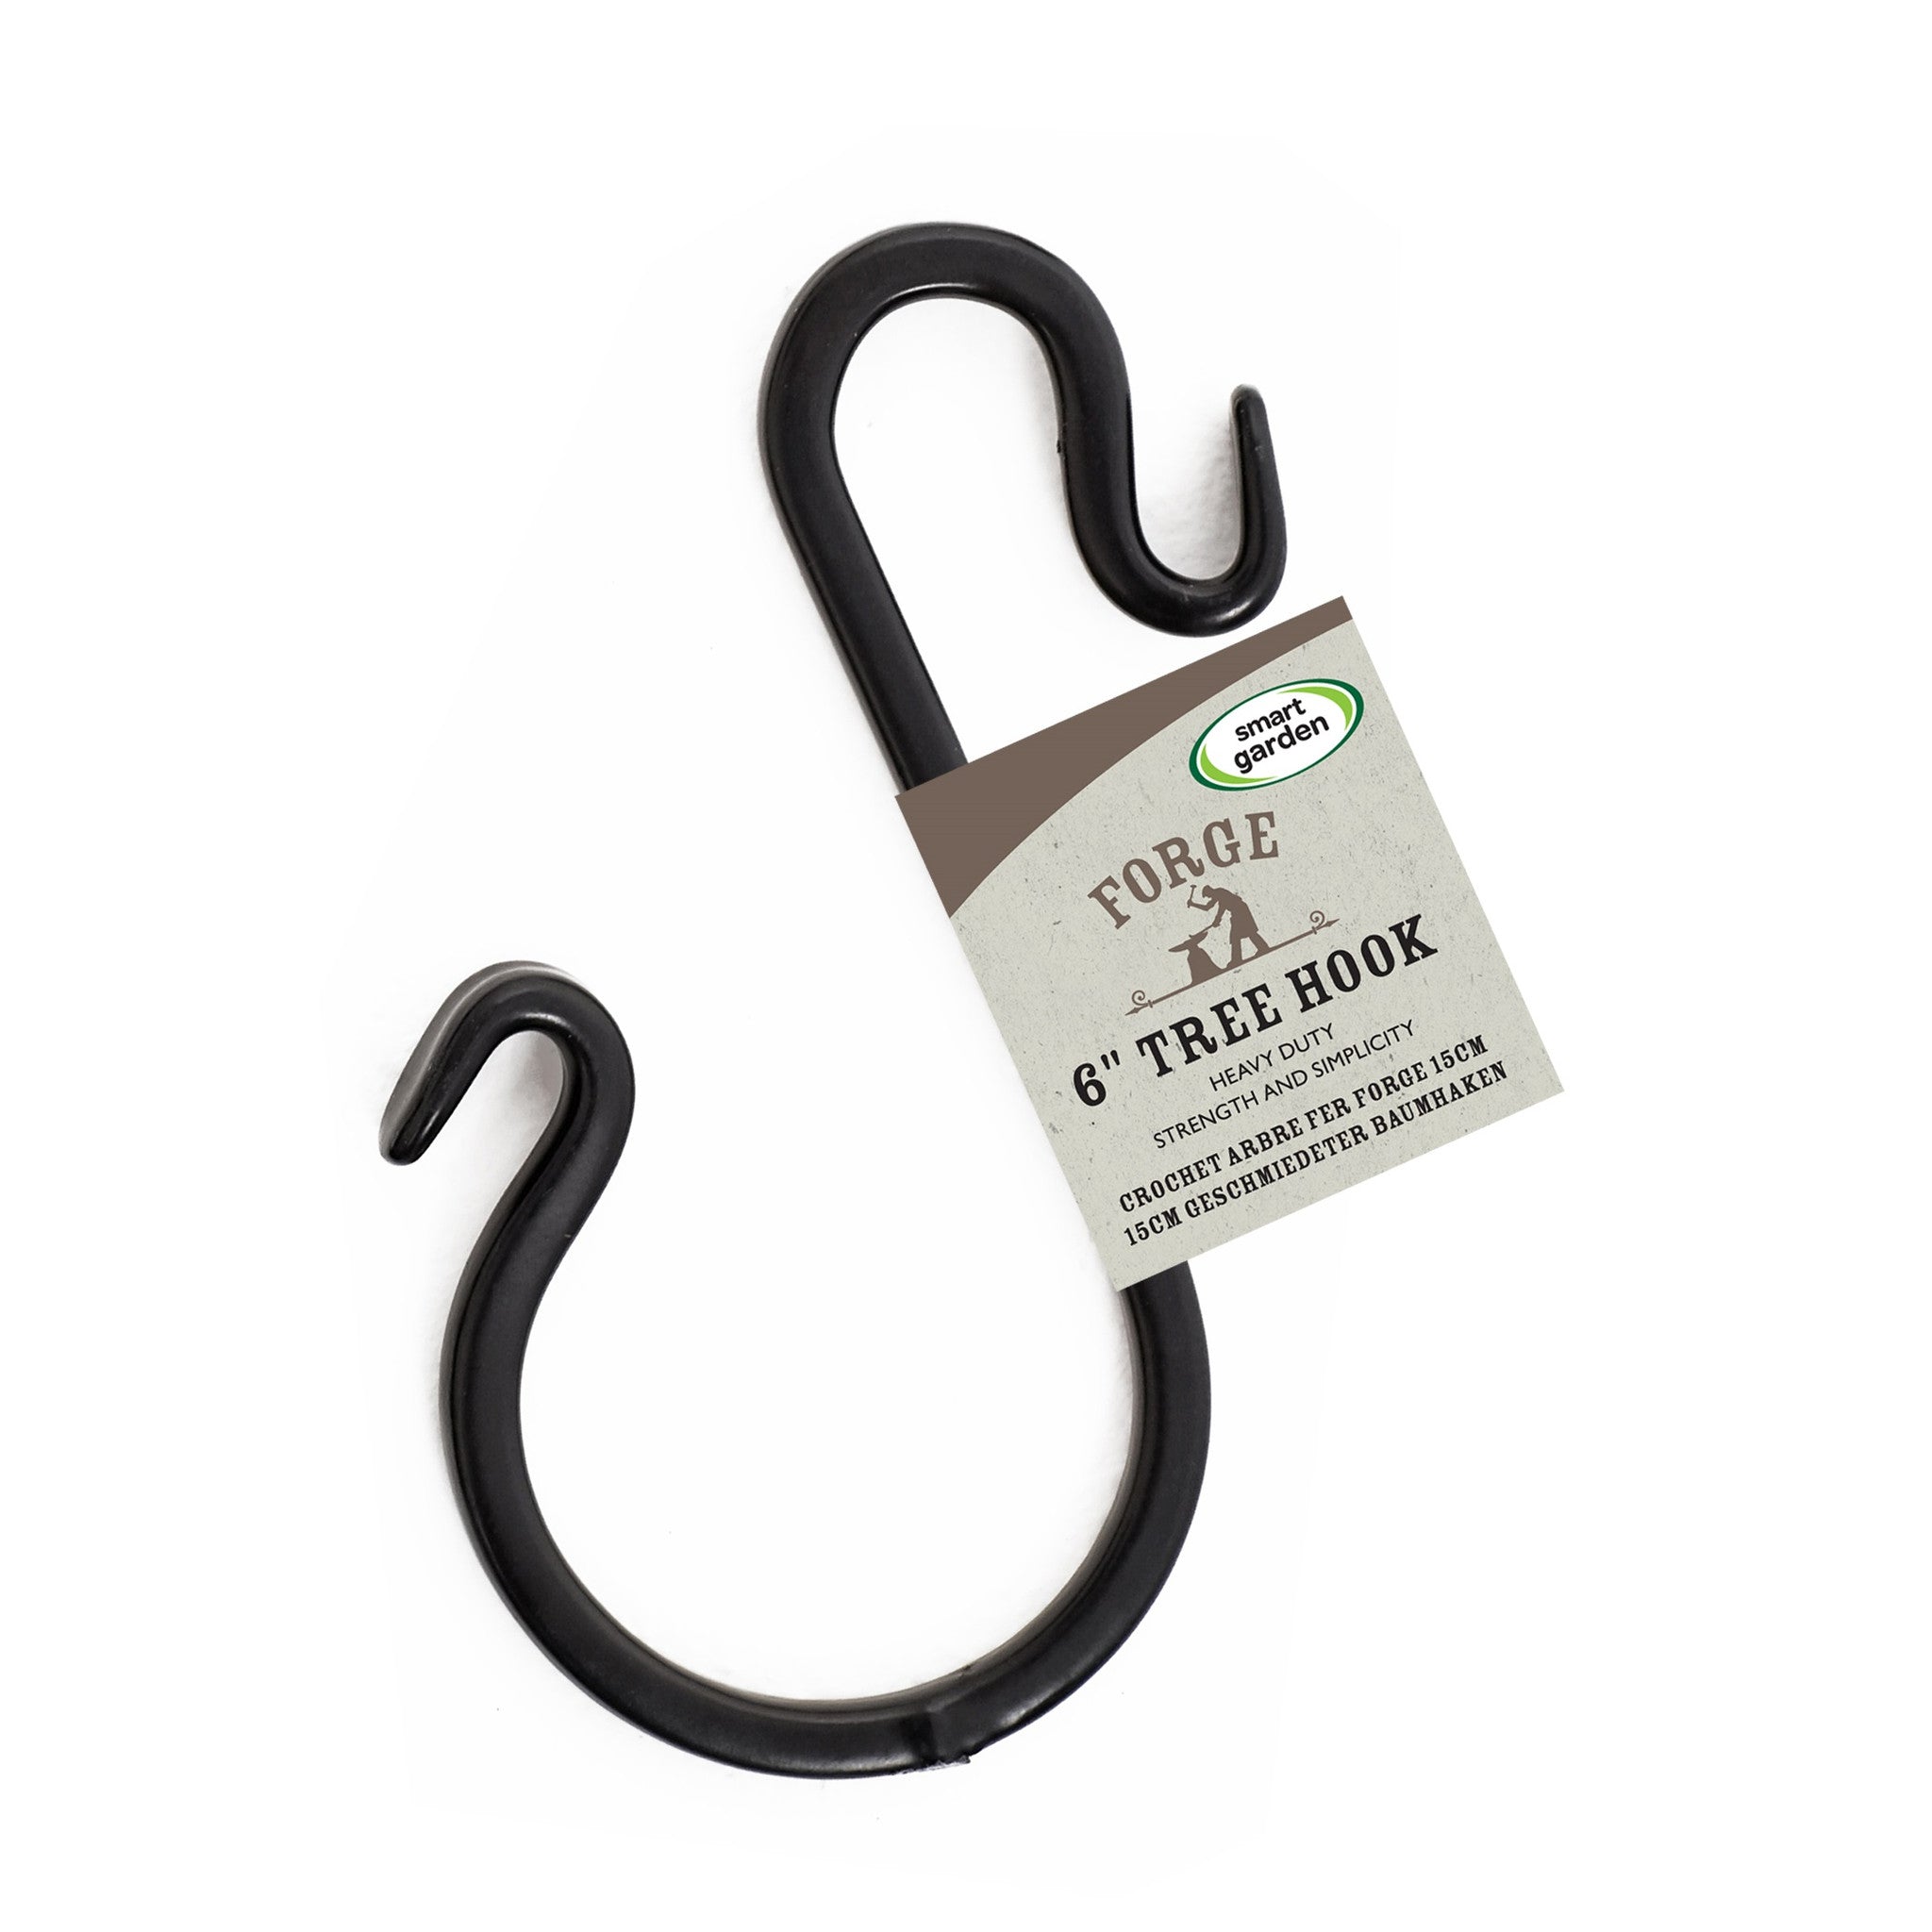 Forge Square Hooks Black - Various Sizes  Buy Baskets/Planters/Pots from  Forge6.95 – W Hurst & Son (IW) Ltd